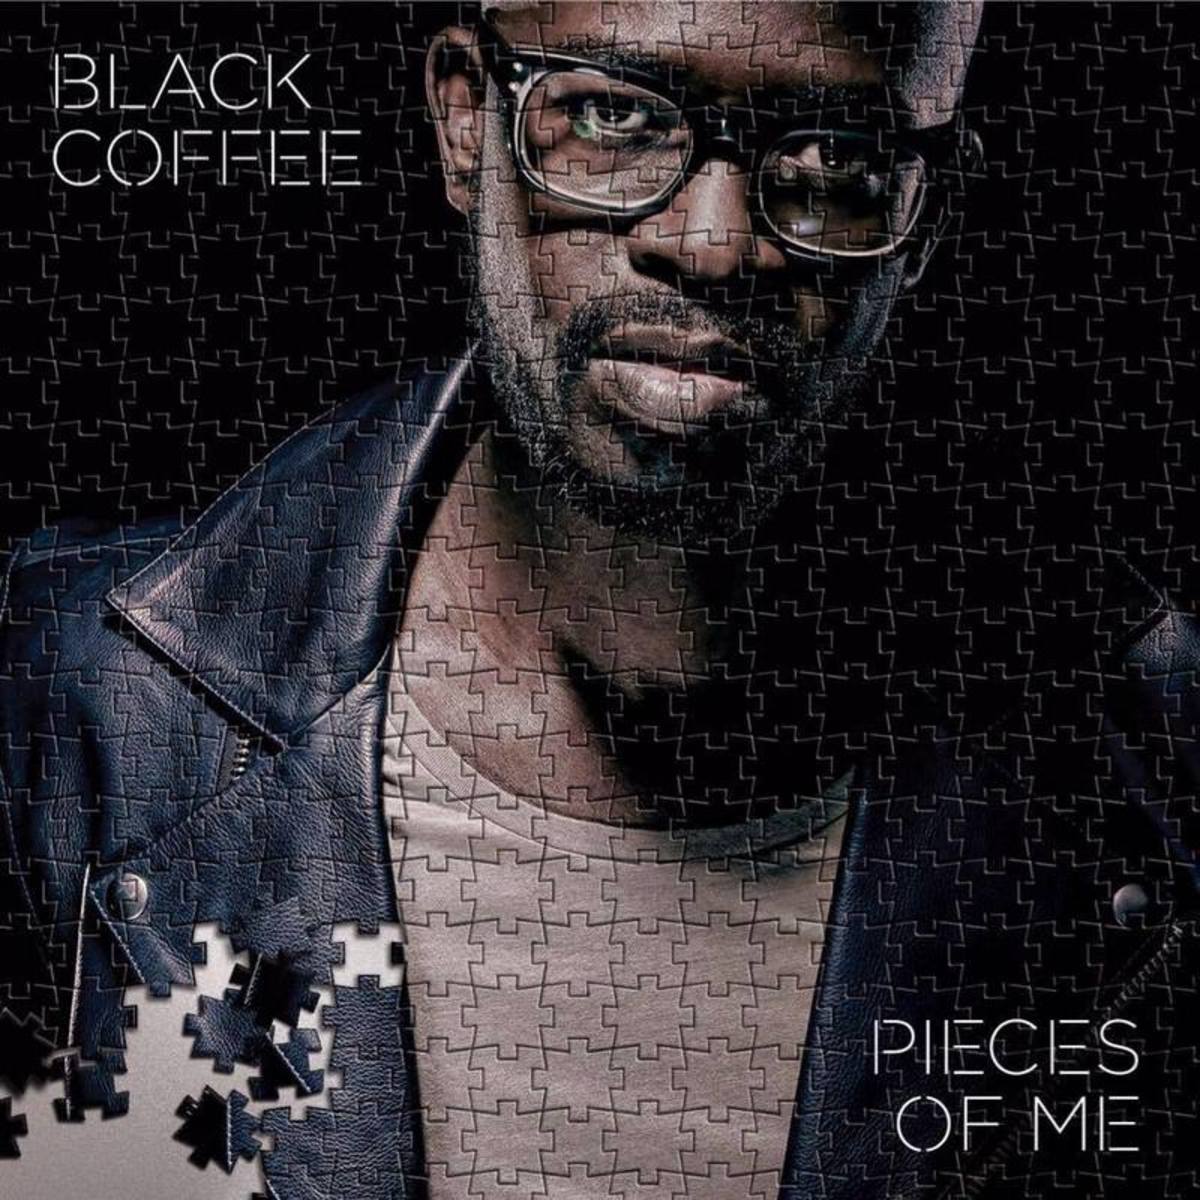 Black Coffee Pieces of Me